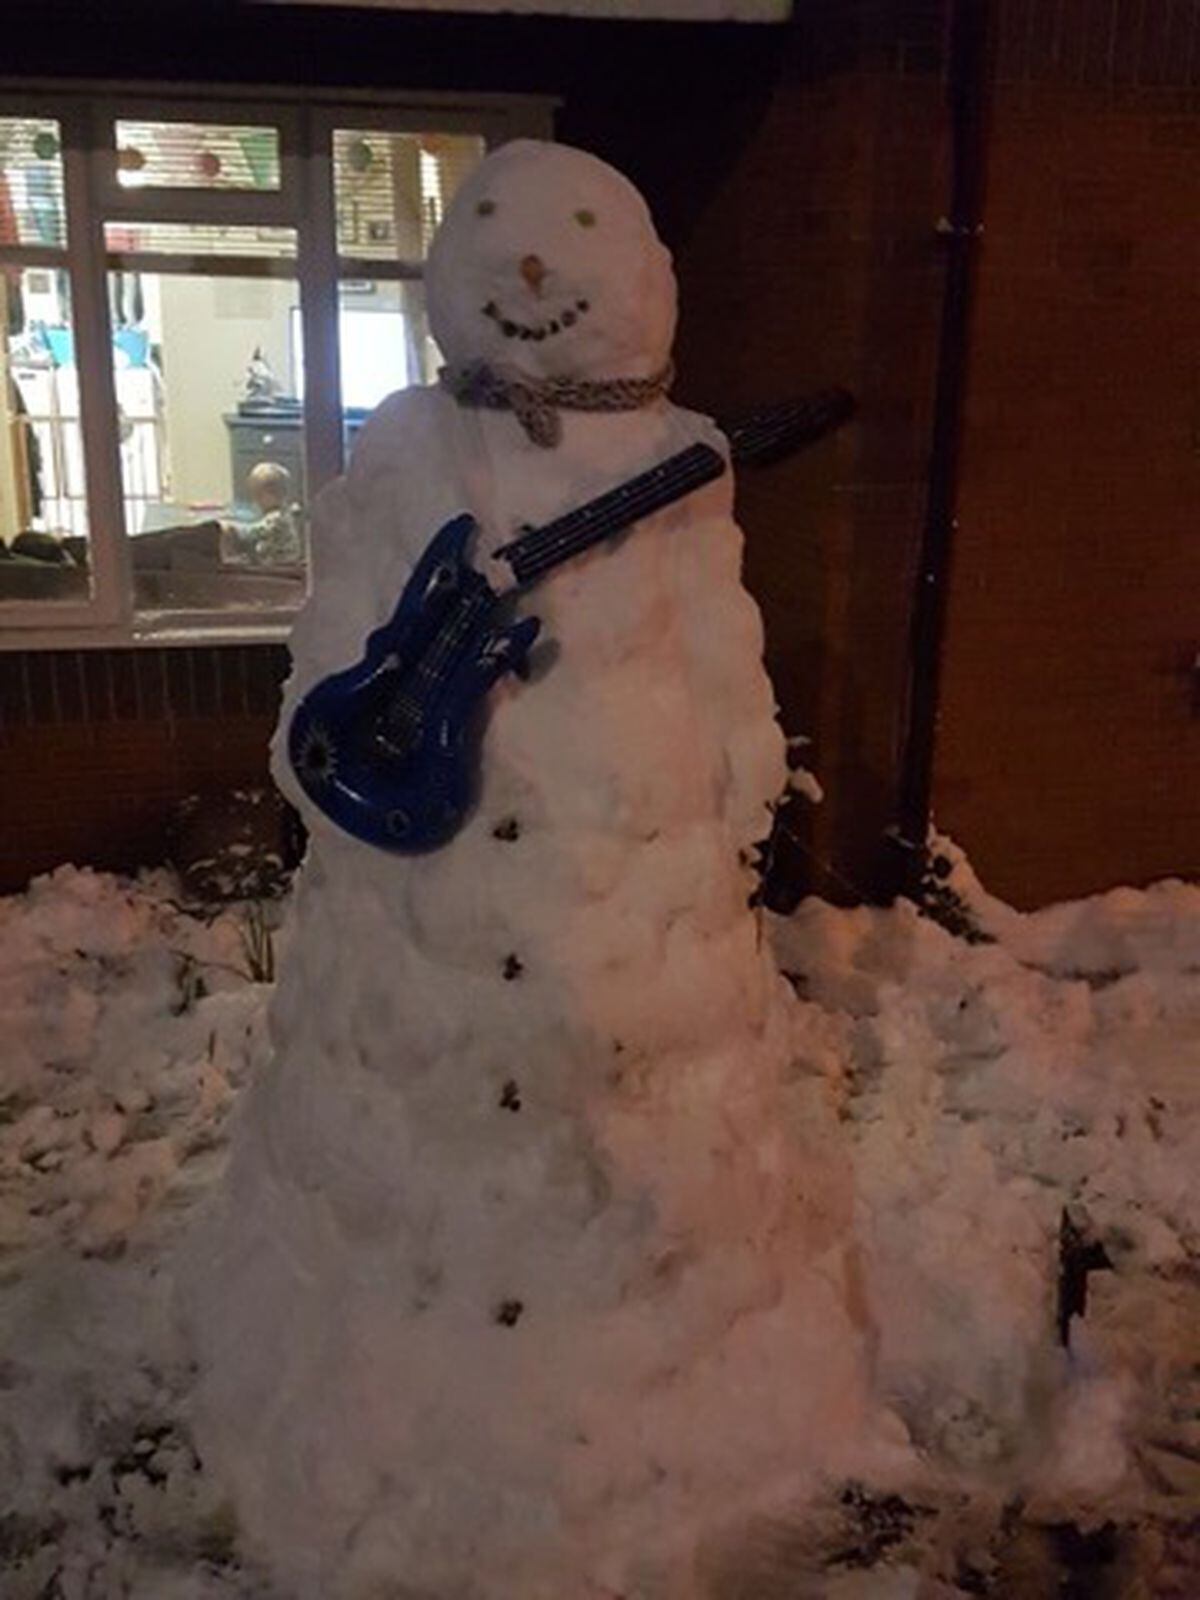 Snowy White? (you've got to be an old rocker to get that!). Photo by Hayley Spragg